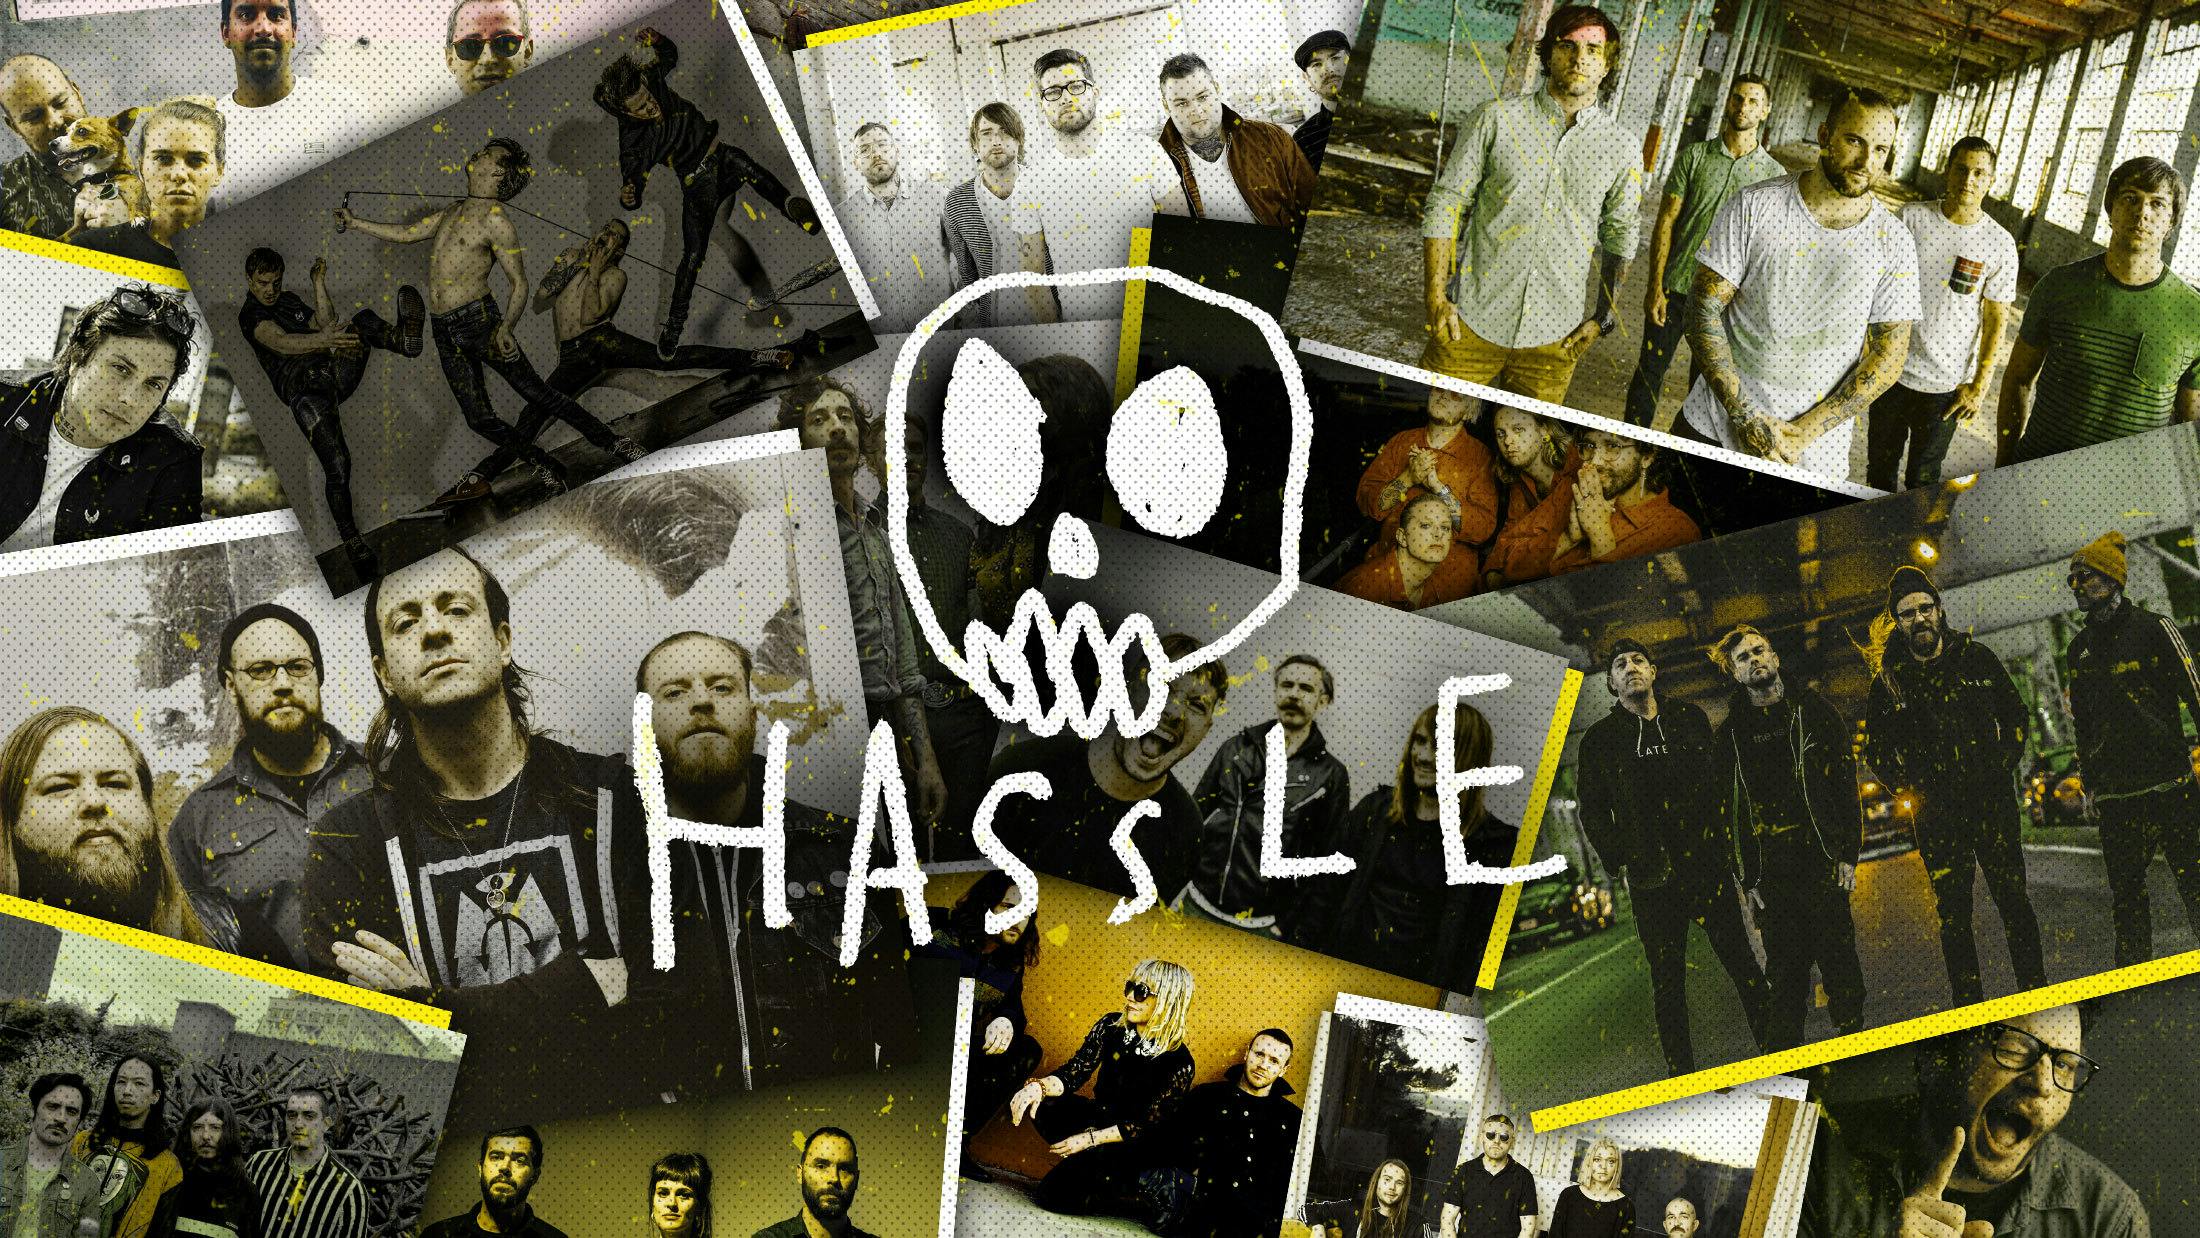 An Oral History Of Hassle Records: One Of The UK's Most Important Labels